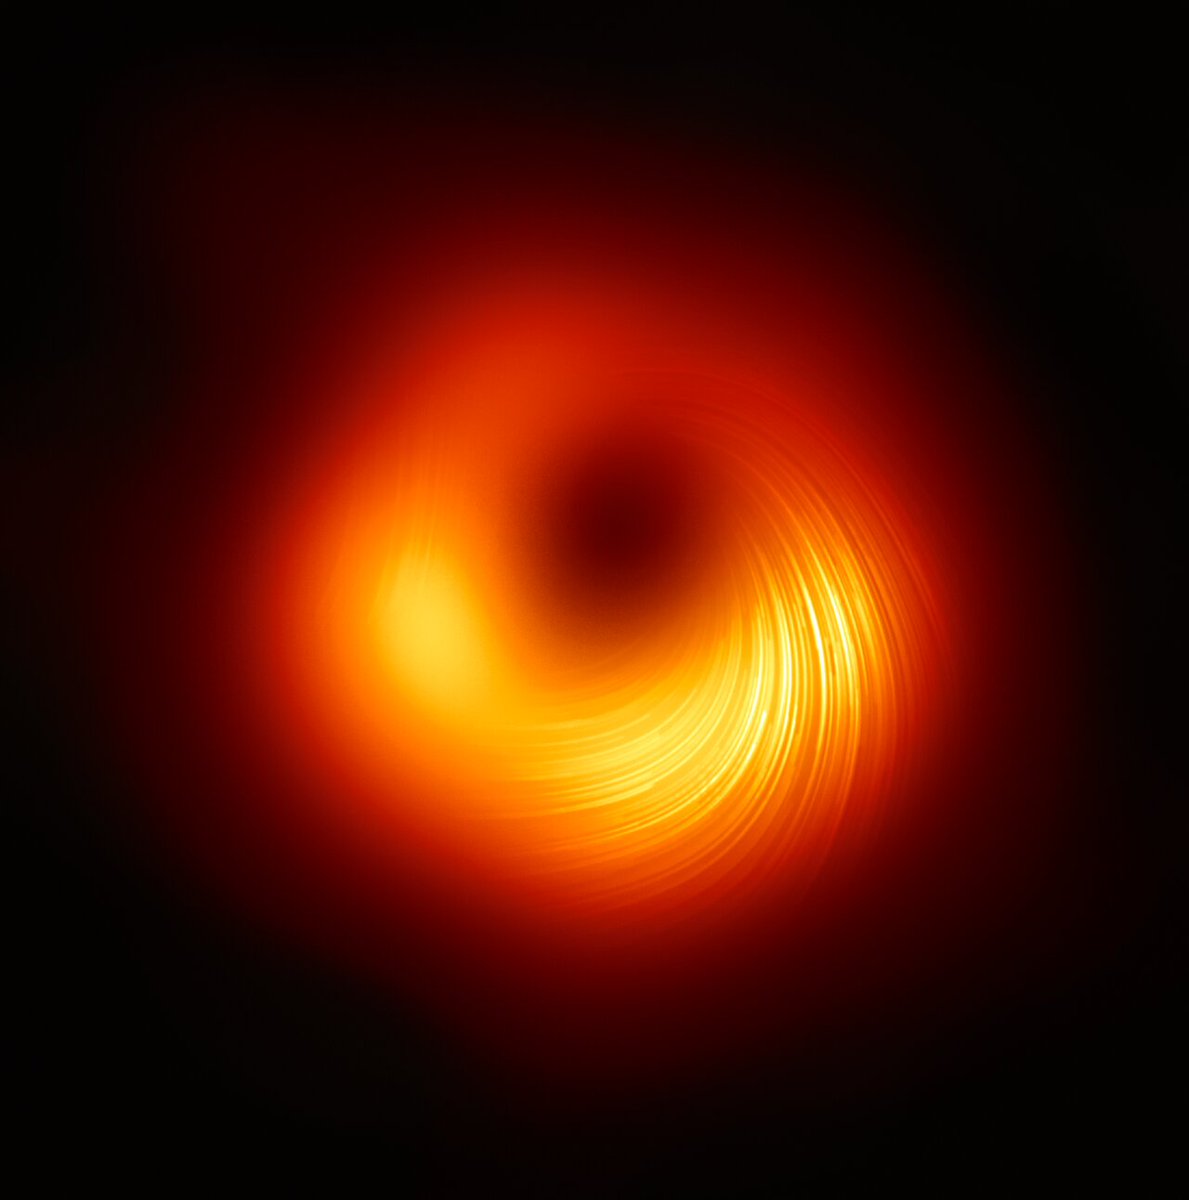 1/ The Event Horizon Telescope (EHT) collaboration, who produced the first ever image of a black hole, have imaged the magnetic fields at the edge of M87’s black hole. #RealBlackHole #EHTblackhole

Credit: @ehtelescope 

eso.org/public/news/es…